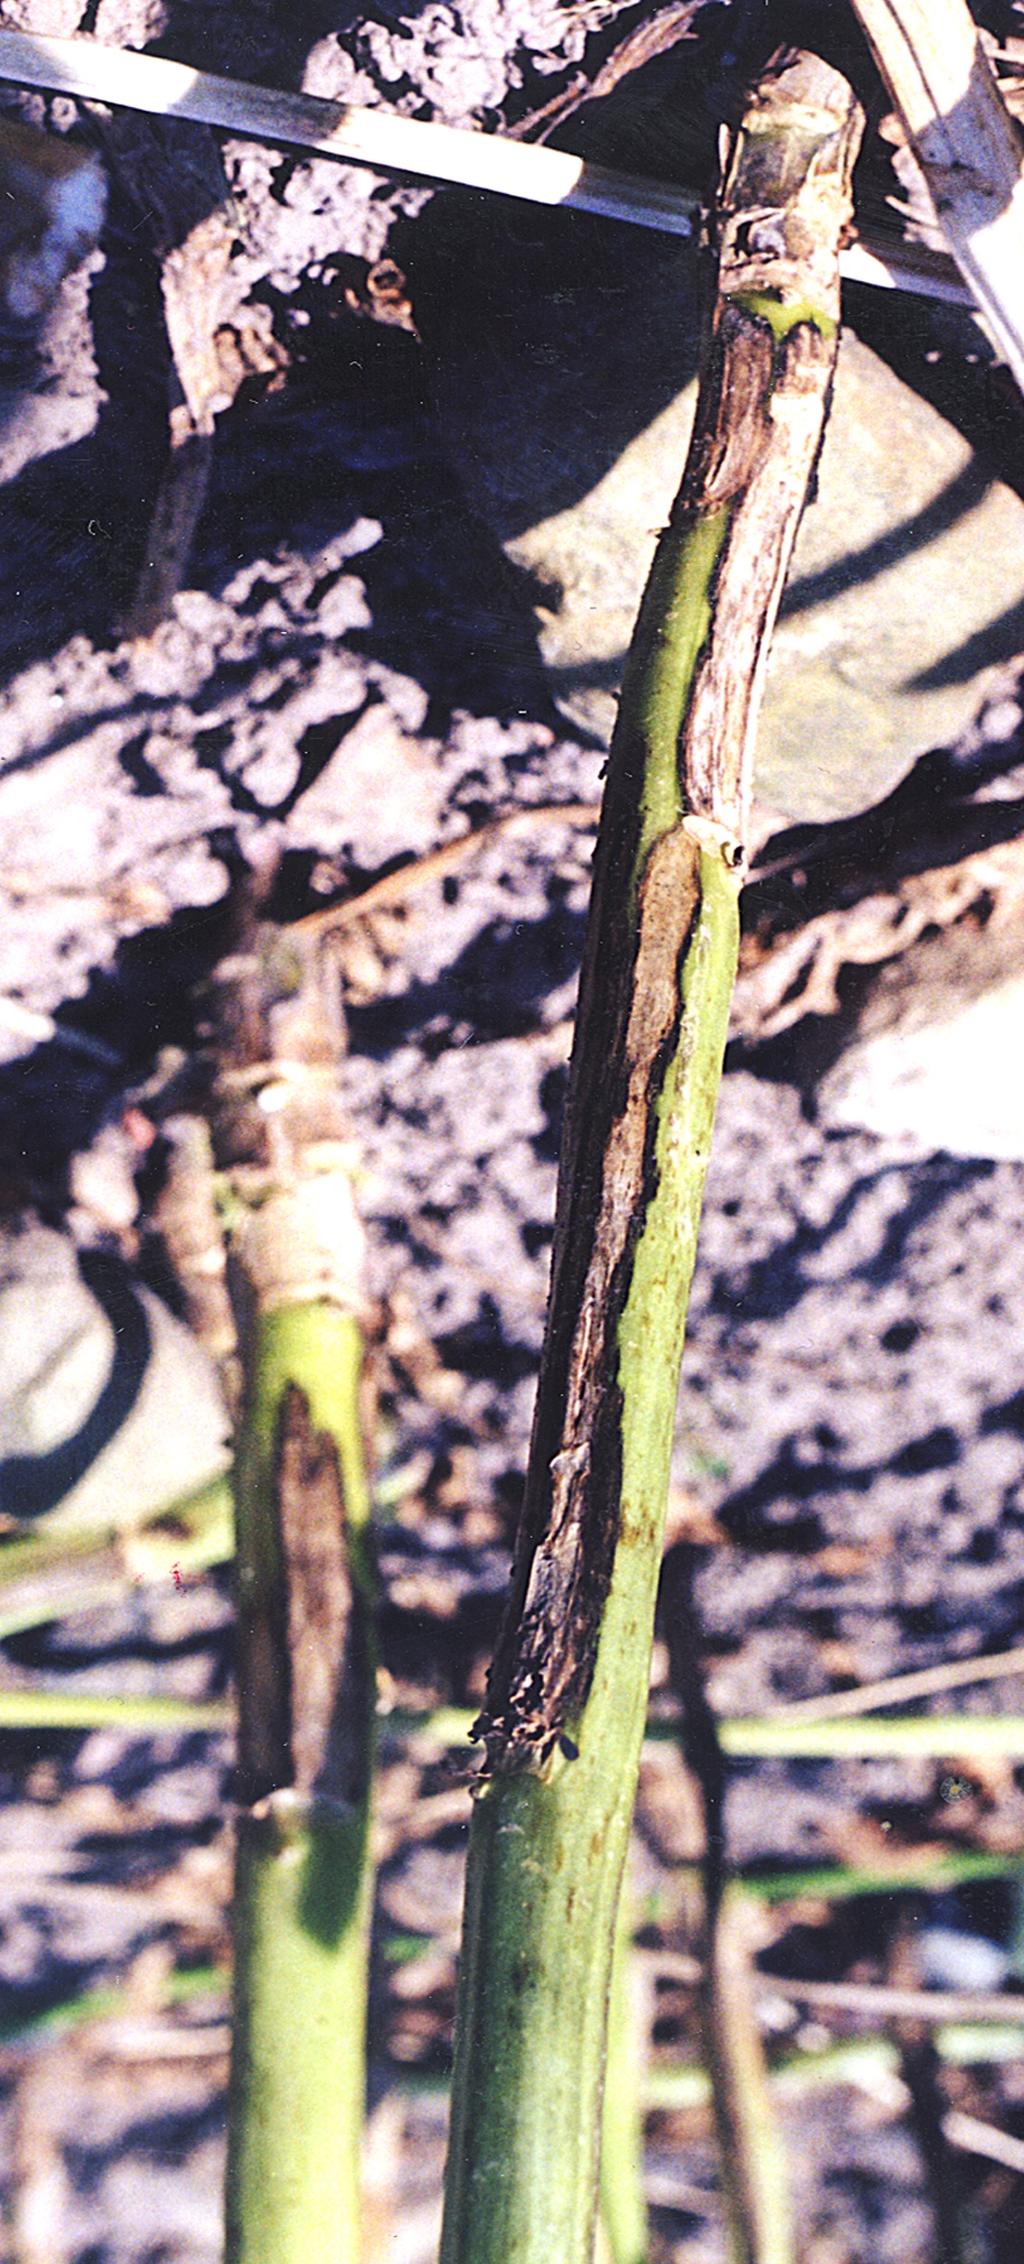 The major yield loss is due to lodging as a result of basal, girdling cankers.